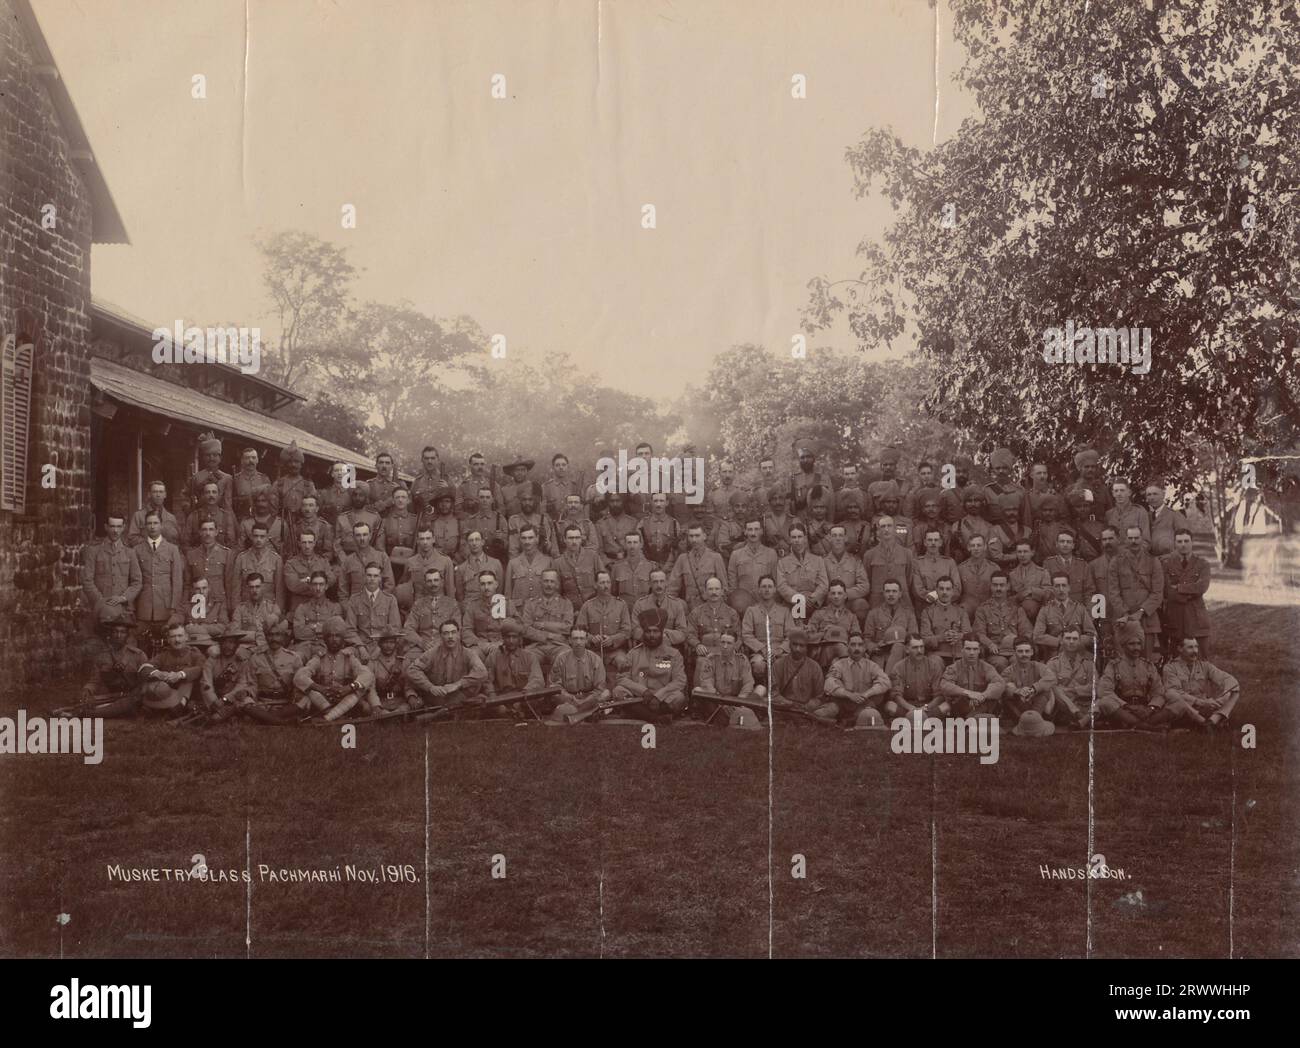 Trainee British and Indian musketeers pose for a group portrait with their rifles outside the School of Musketry at Pachmarhi. Winthrop studied for this course at Pachmarhi from October -December 1916.  Printed caption: Musketry Class Pachmarhi Nov, 1916. Hands & Son. Stock Photo